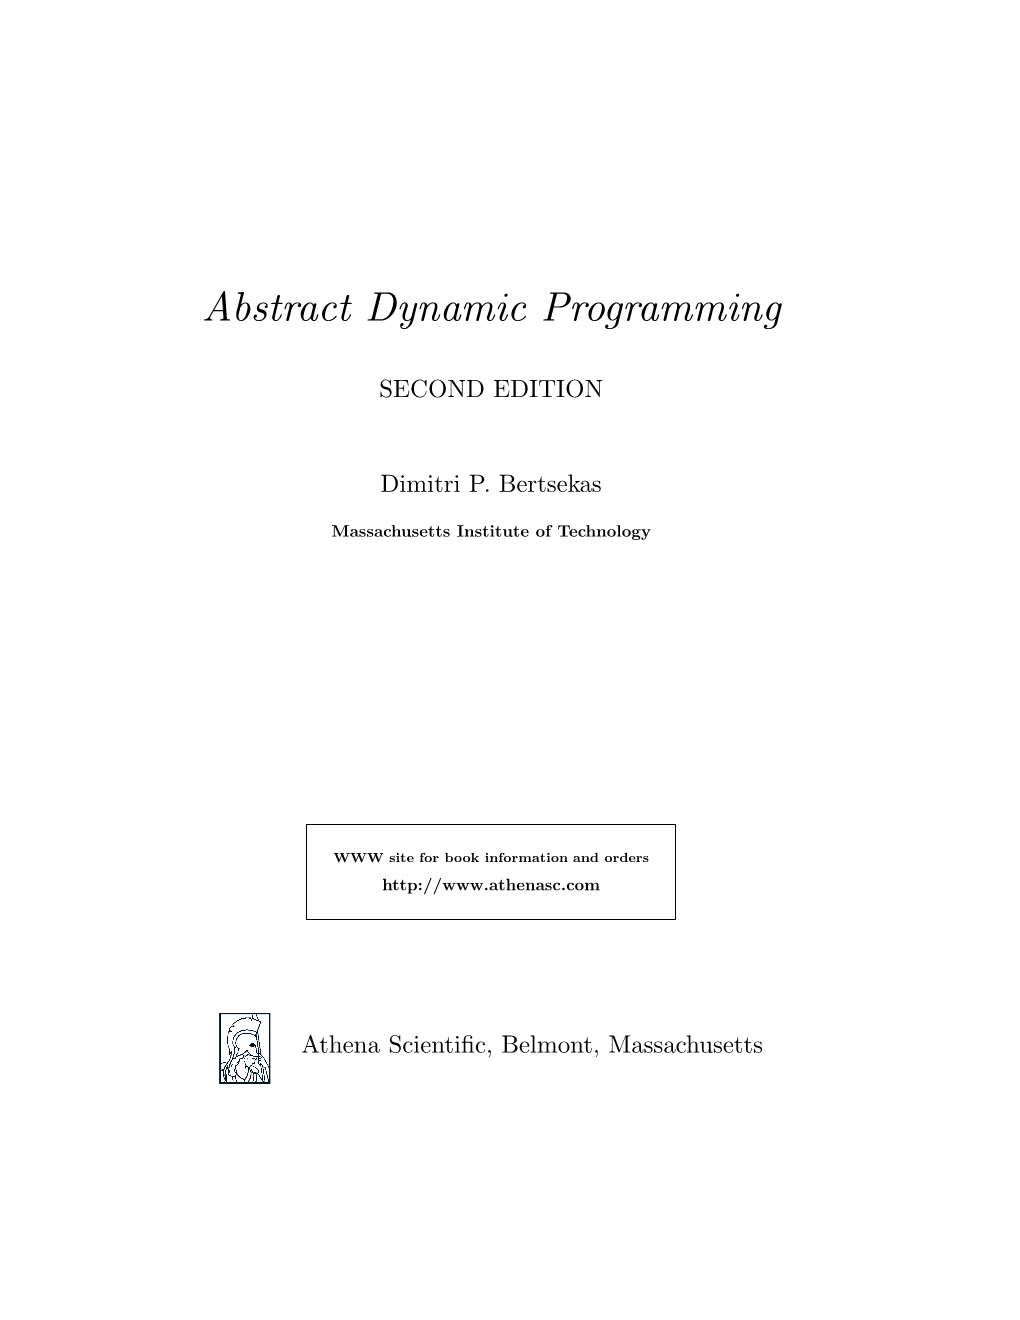 Abstract Dynamic Programming, 2Nd Edition, by Dimitri P